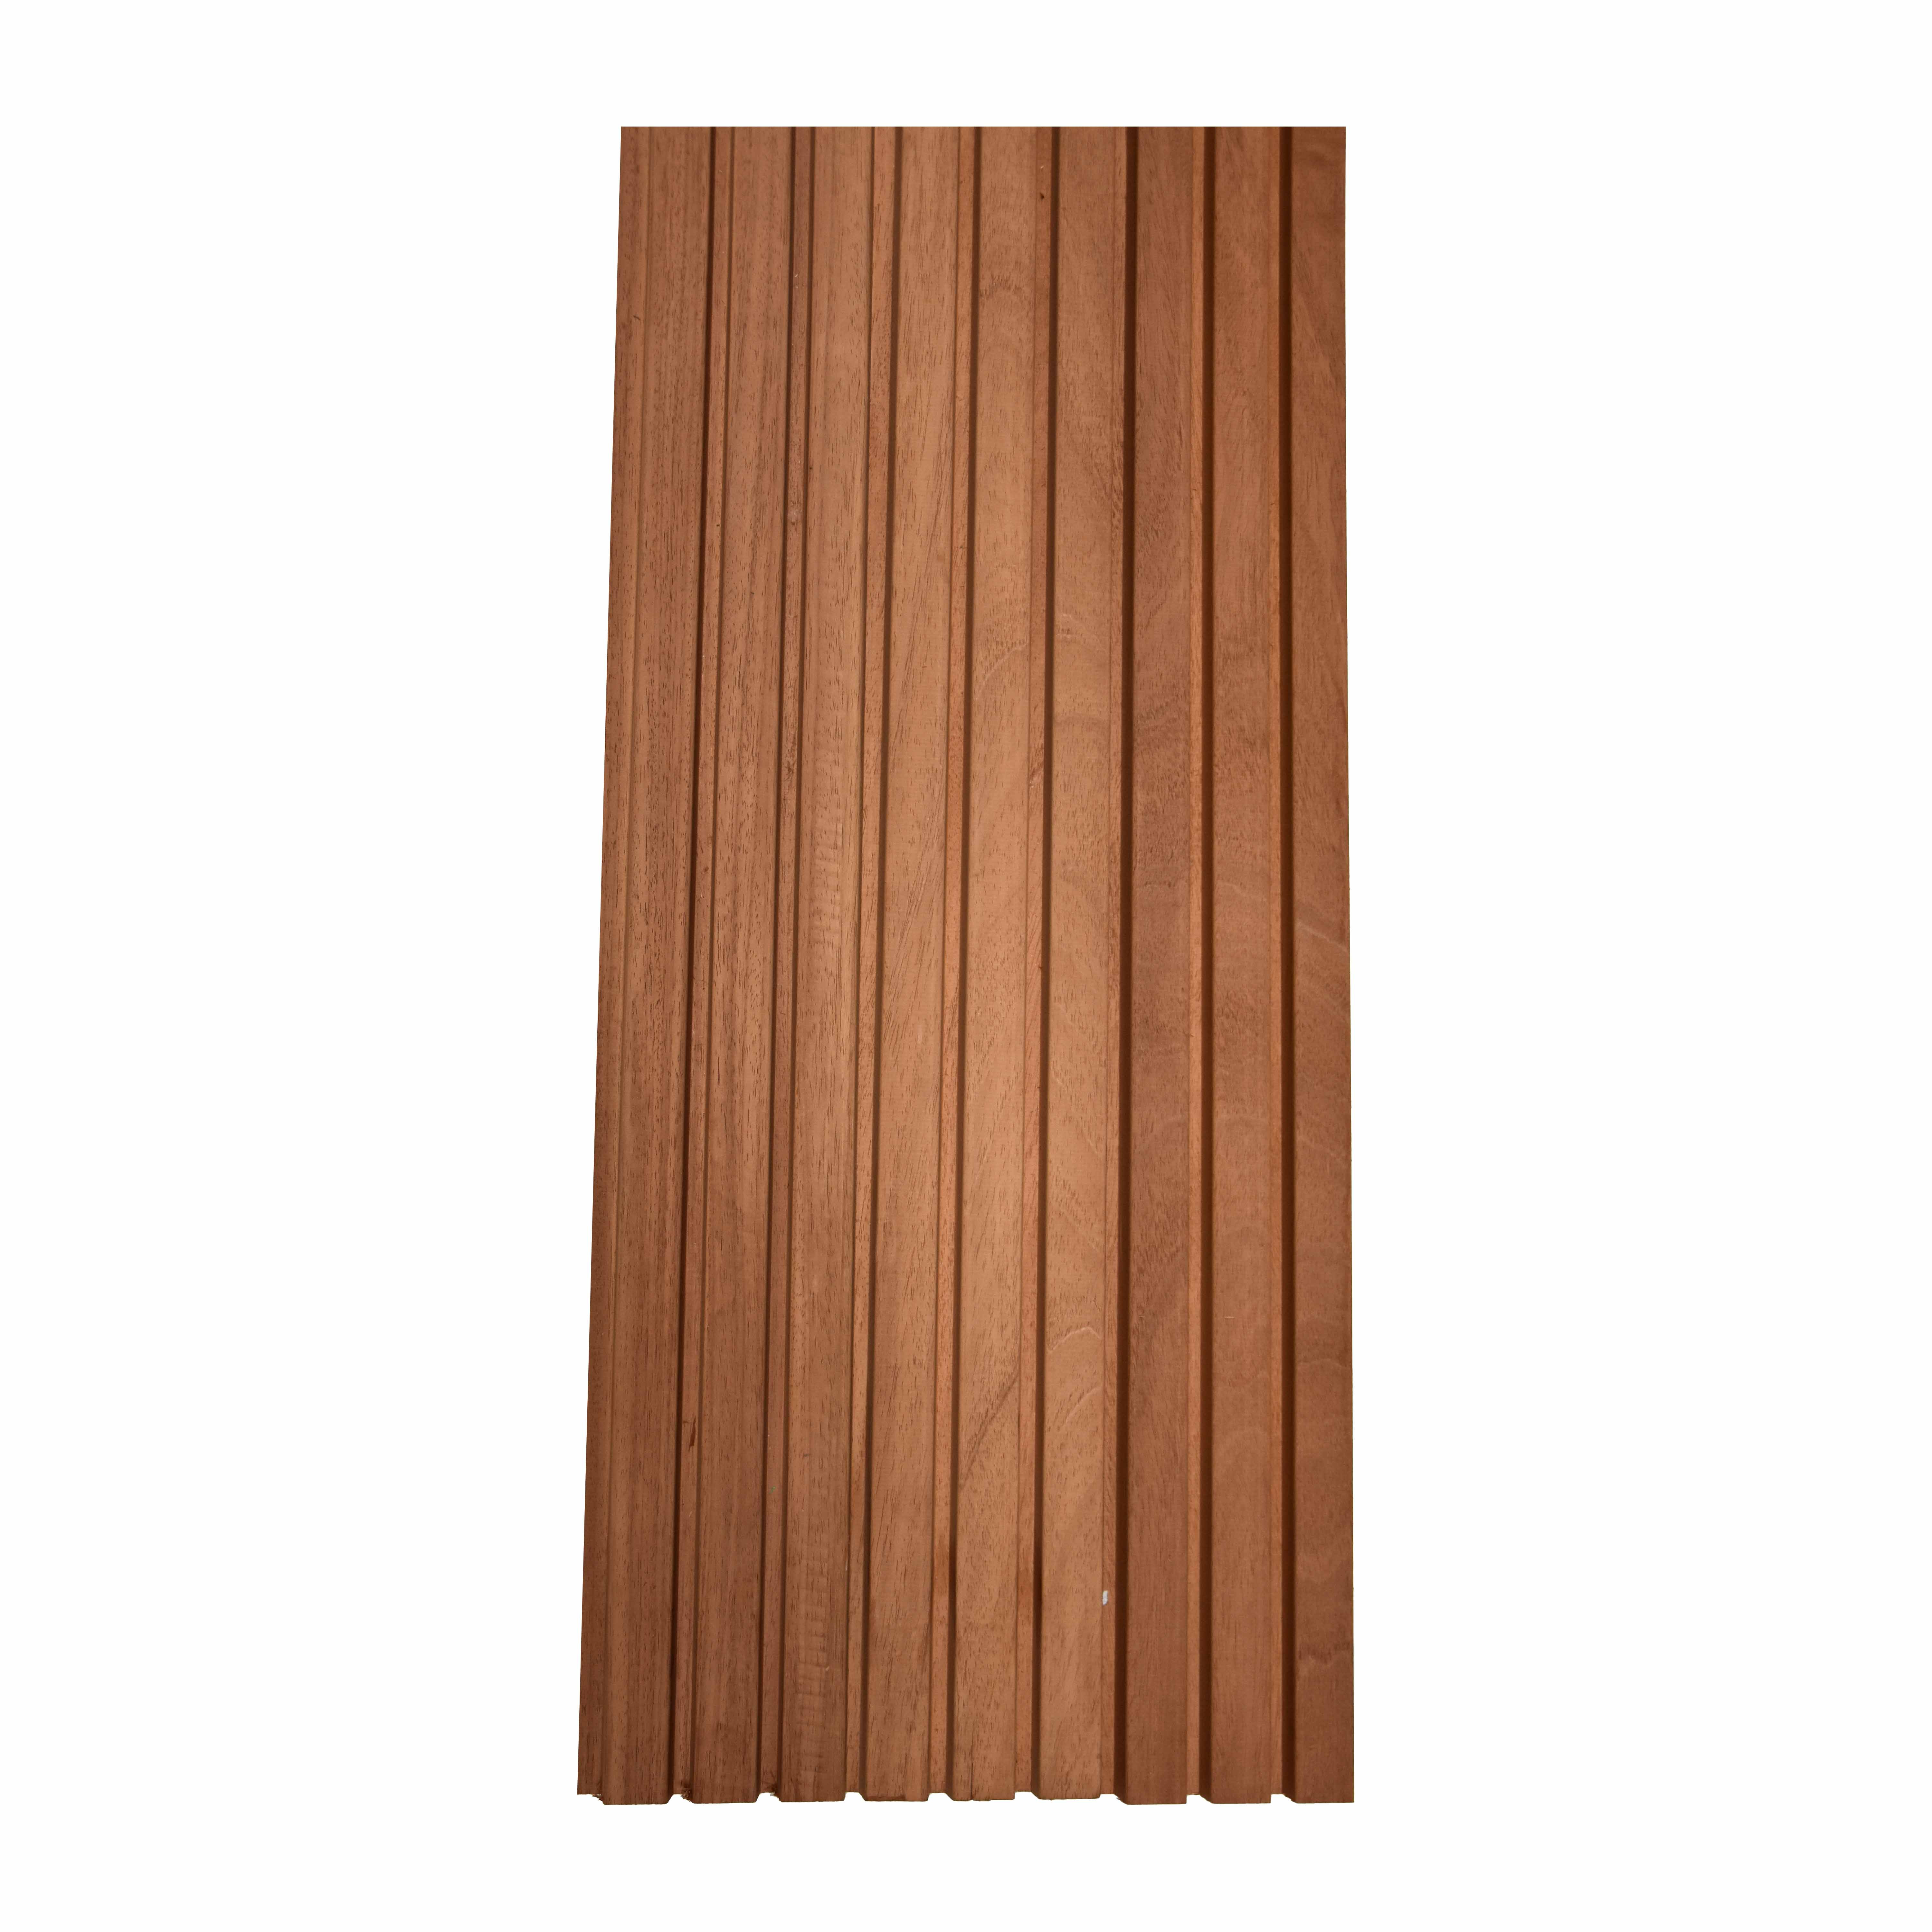 THERMOWOOD AYOUS TRIPLE 30X140MM (132)